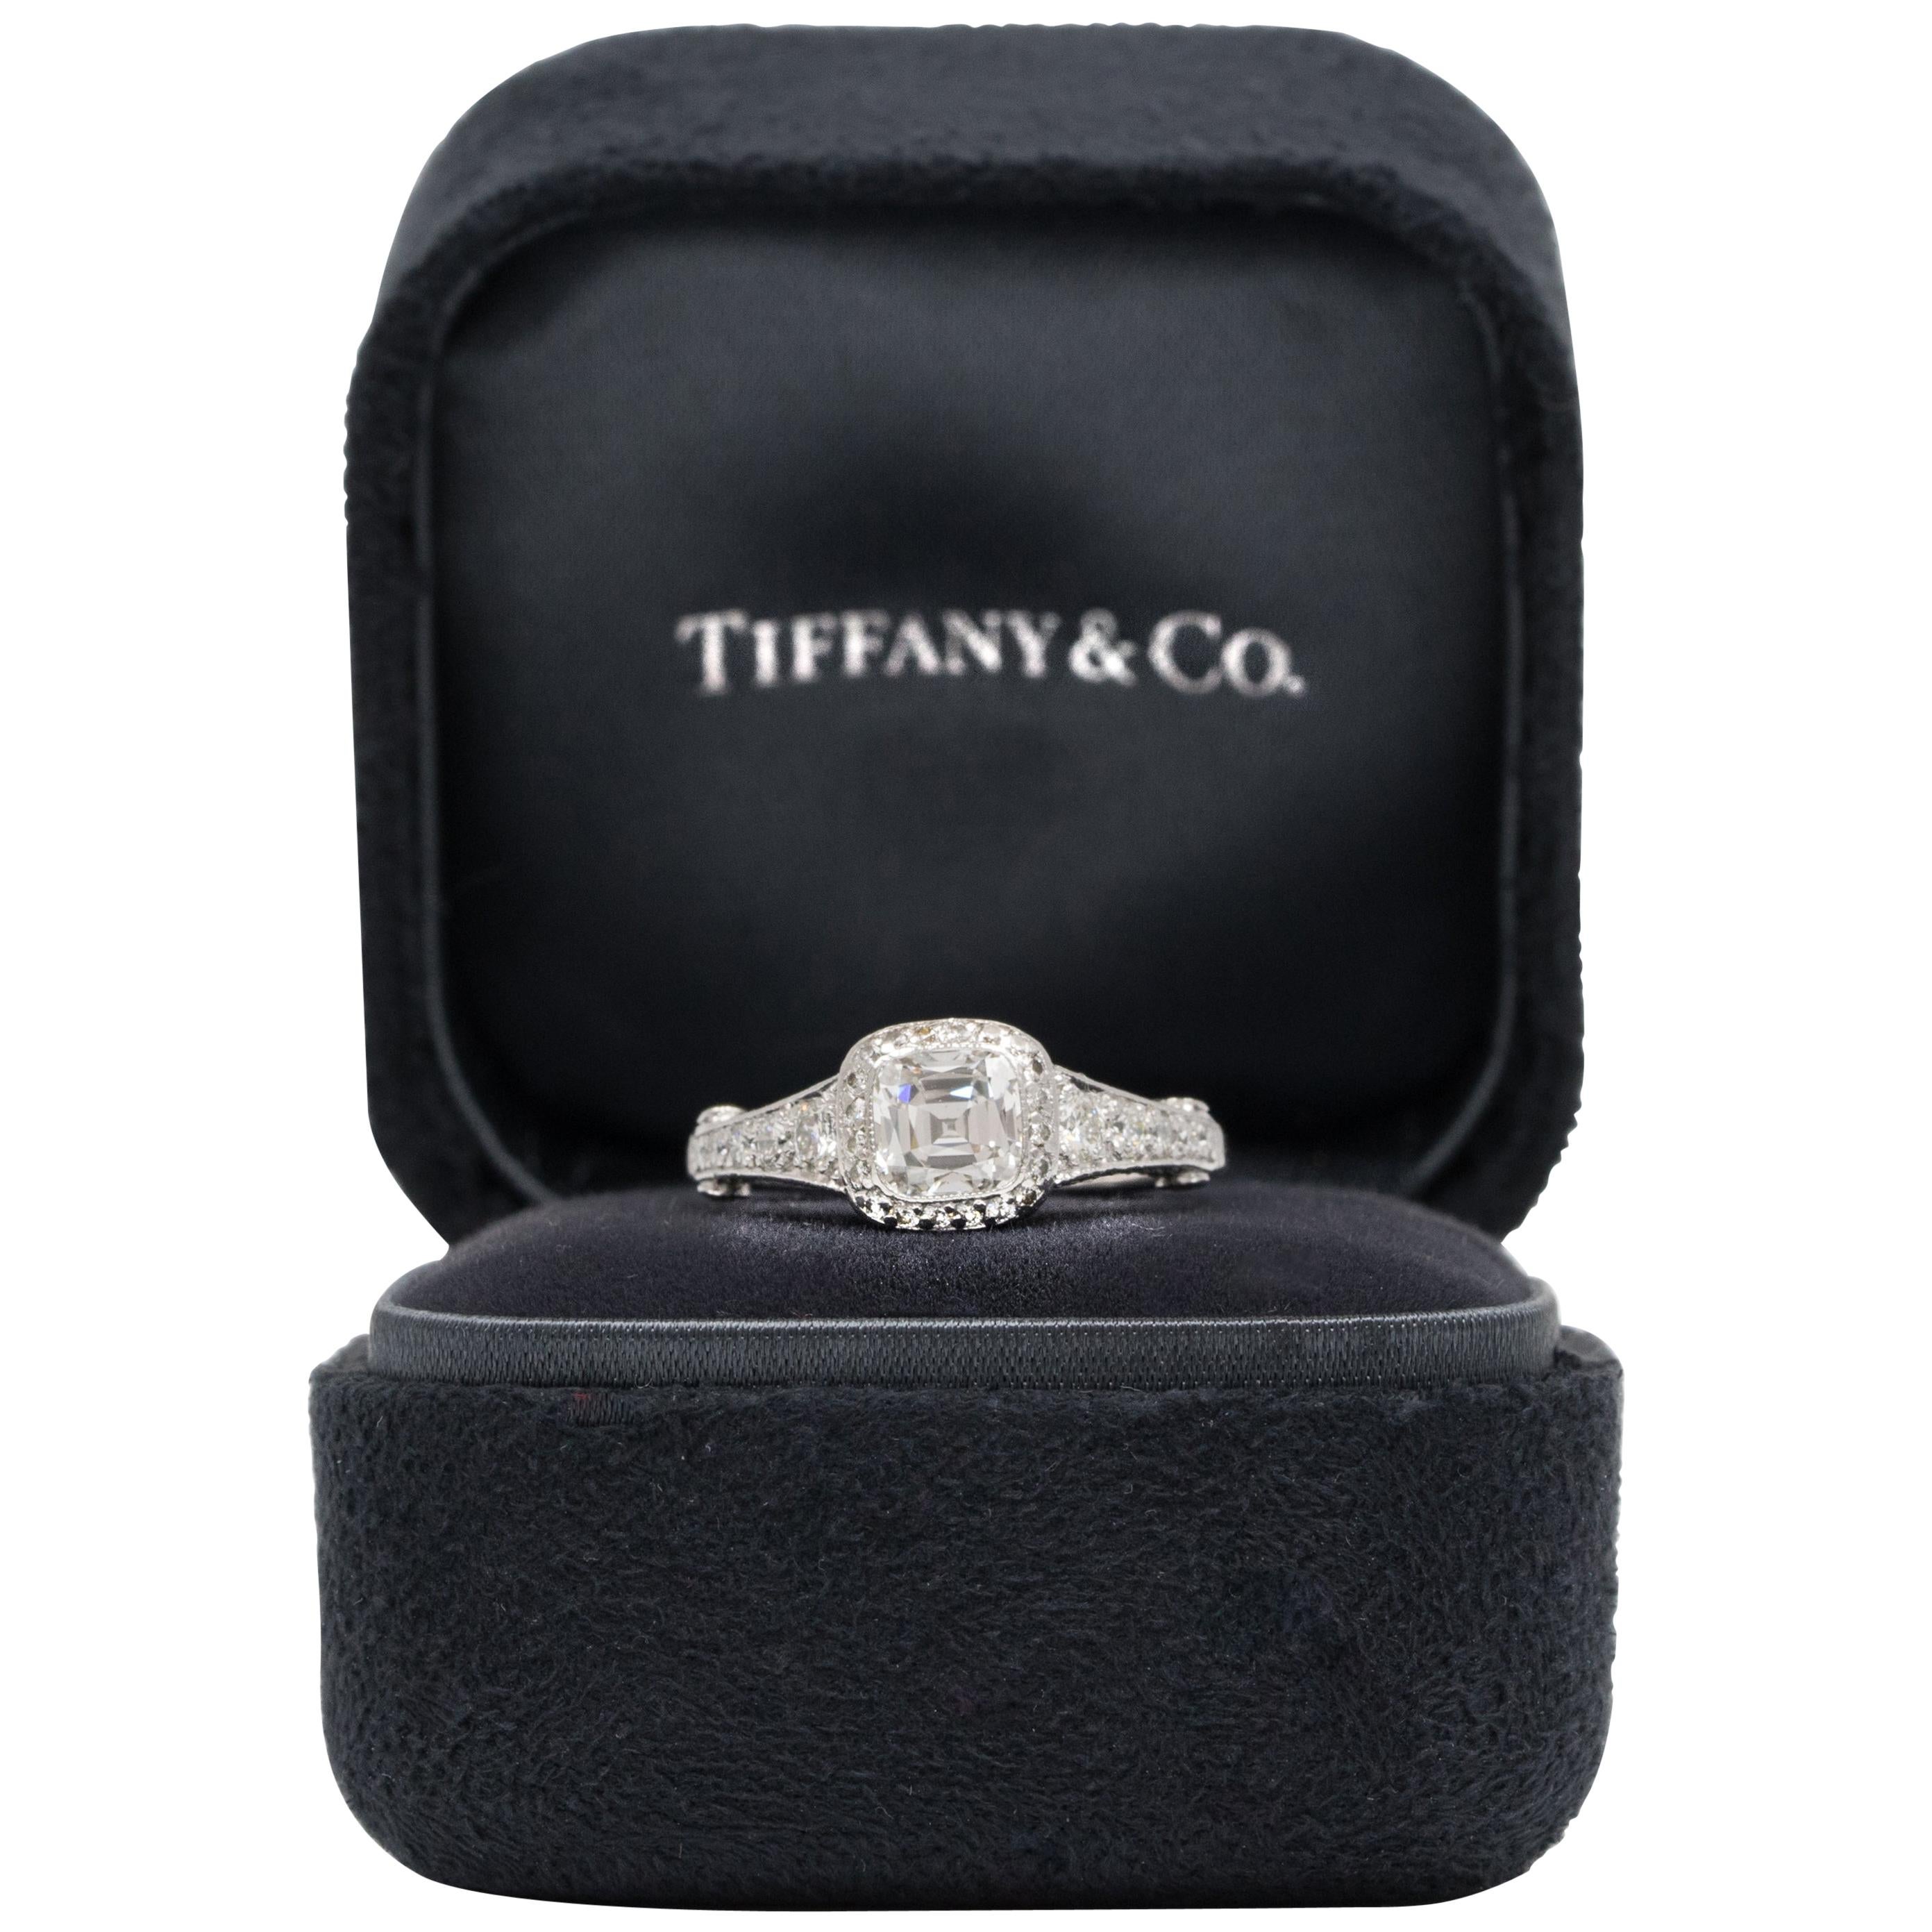 Tiffany Legacy® Engagement Ring with a 1.18 Carat Cushion-cut D VVS1 GIA